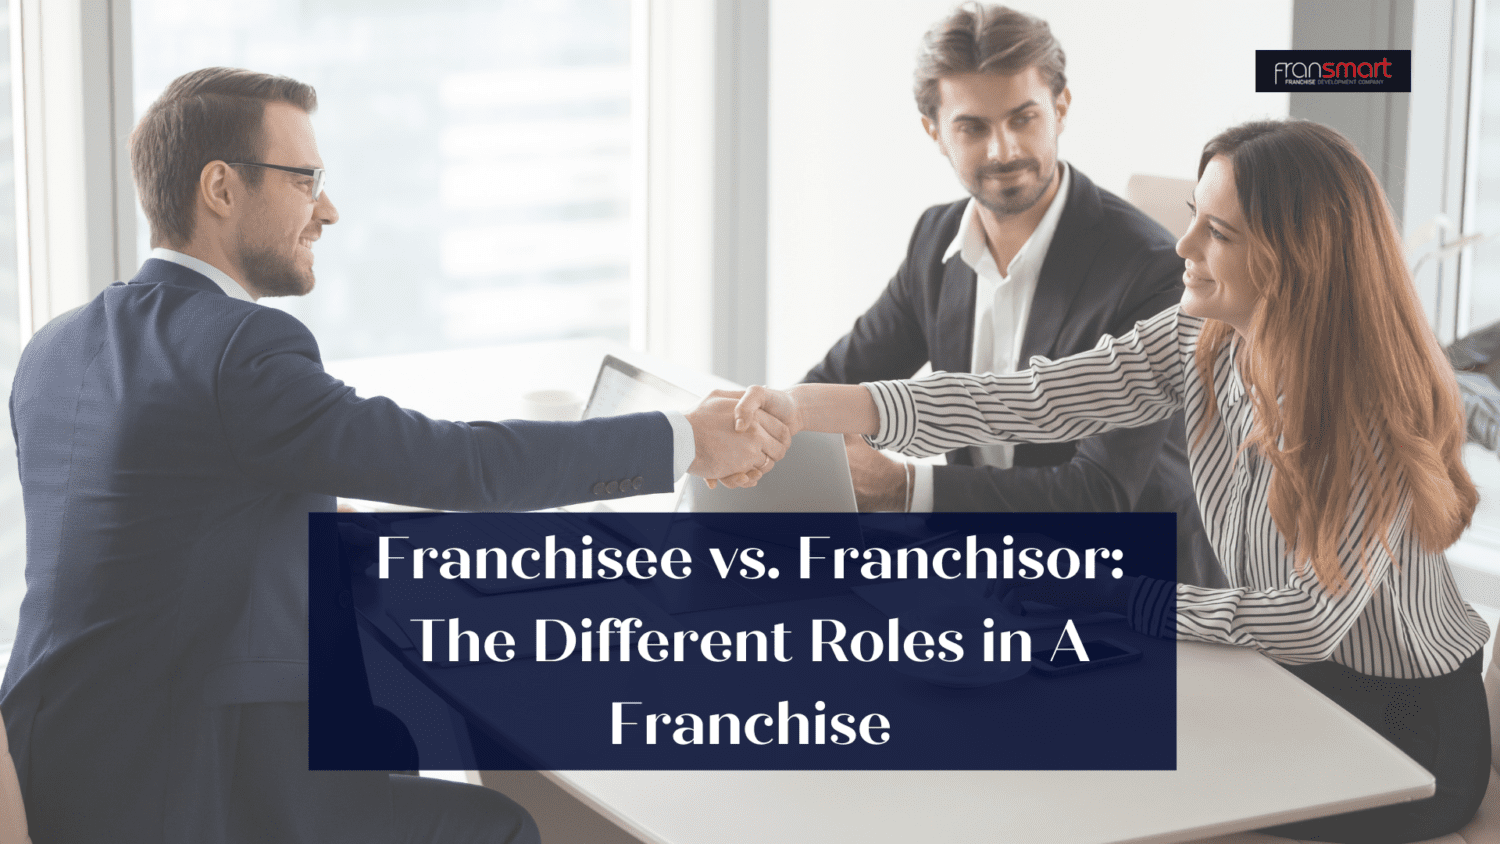 Franchisee vs. Franchisor The Different Roles in A Franchise